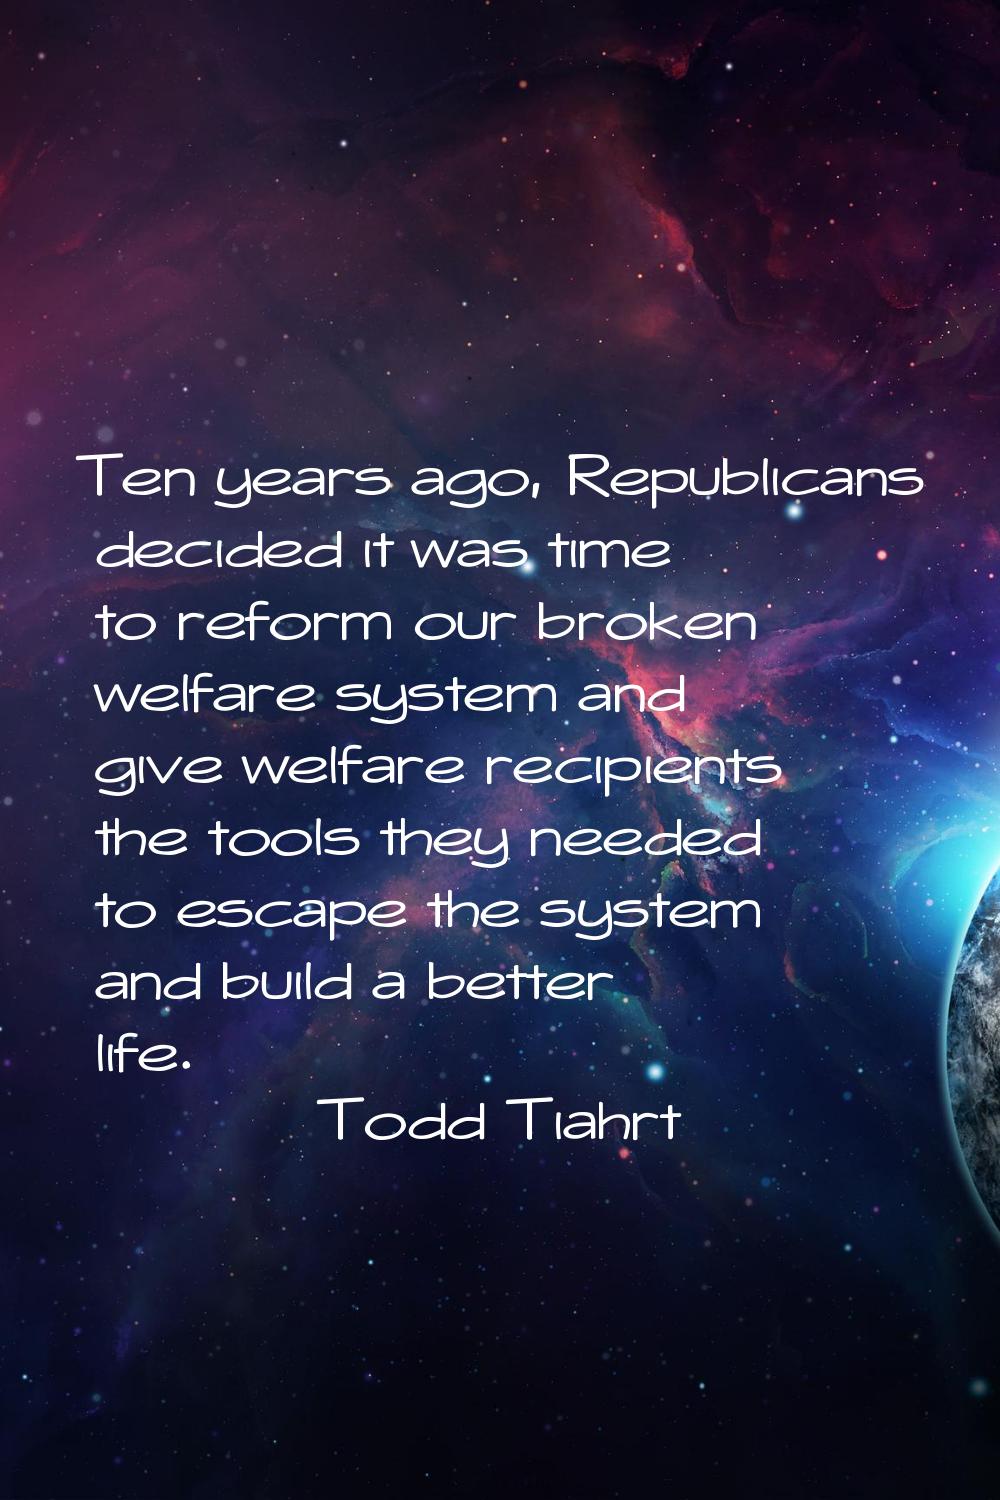 Ten years ago, Republicans decided it was time to reform our broken welfare system and give welfare